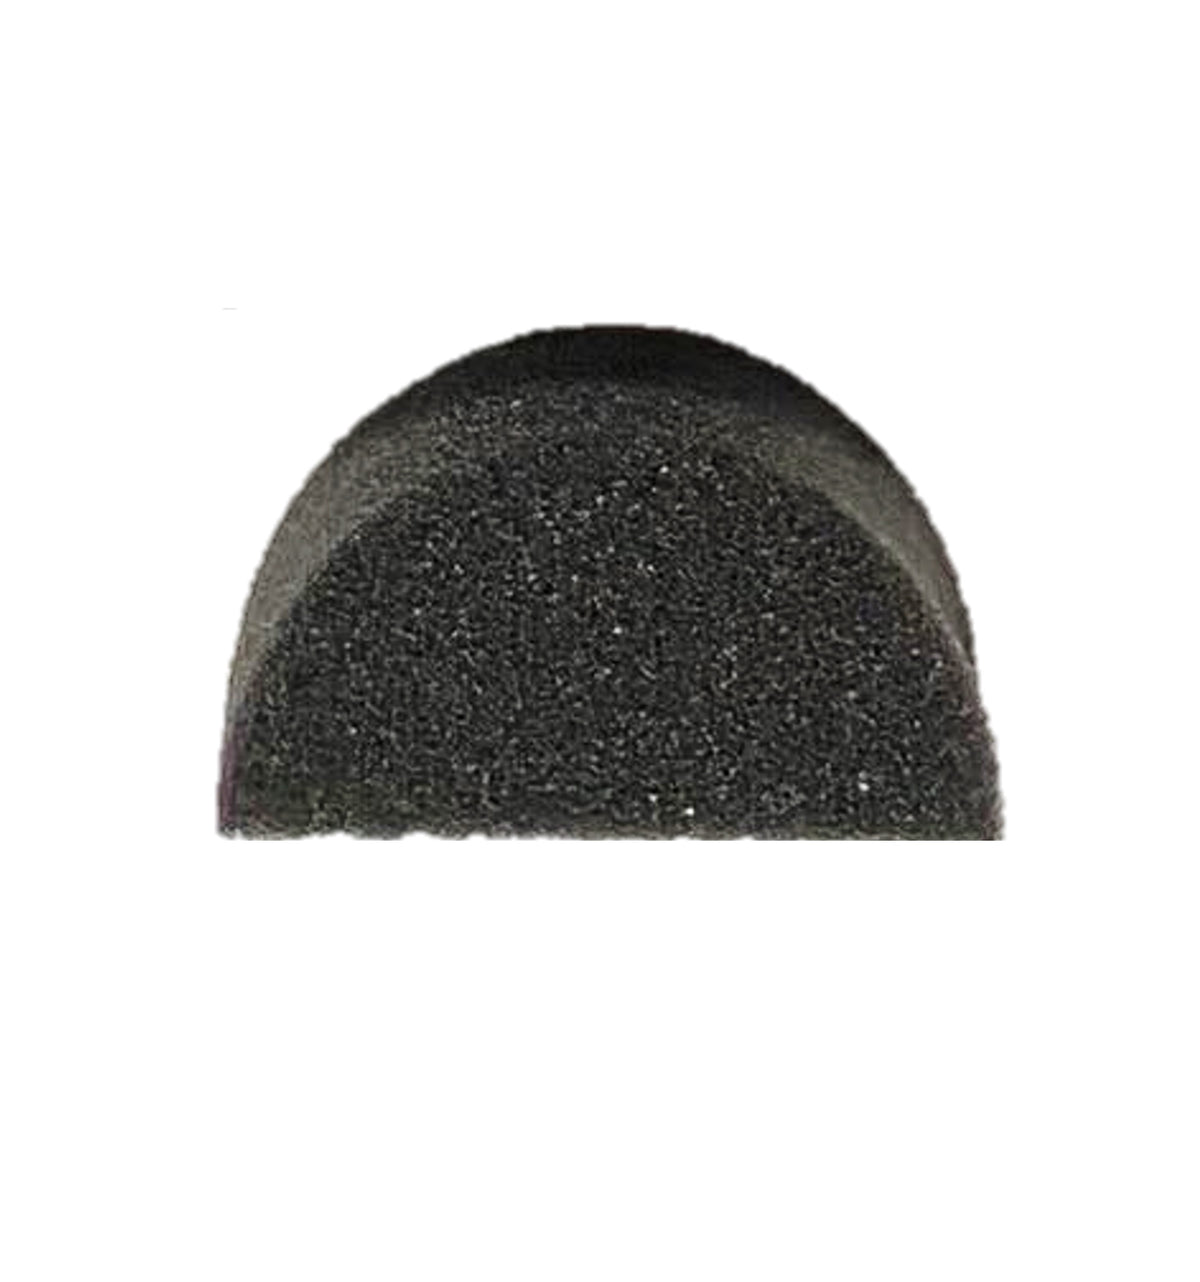 Kryvaline - Small Never Stain* FIRM Black Face Painting Sponge - 1 Half